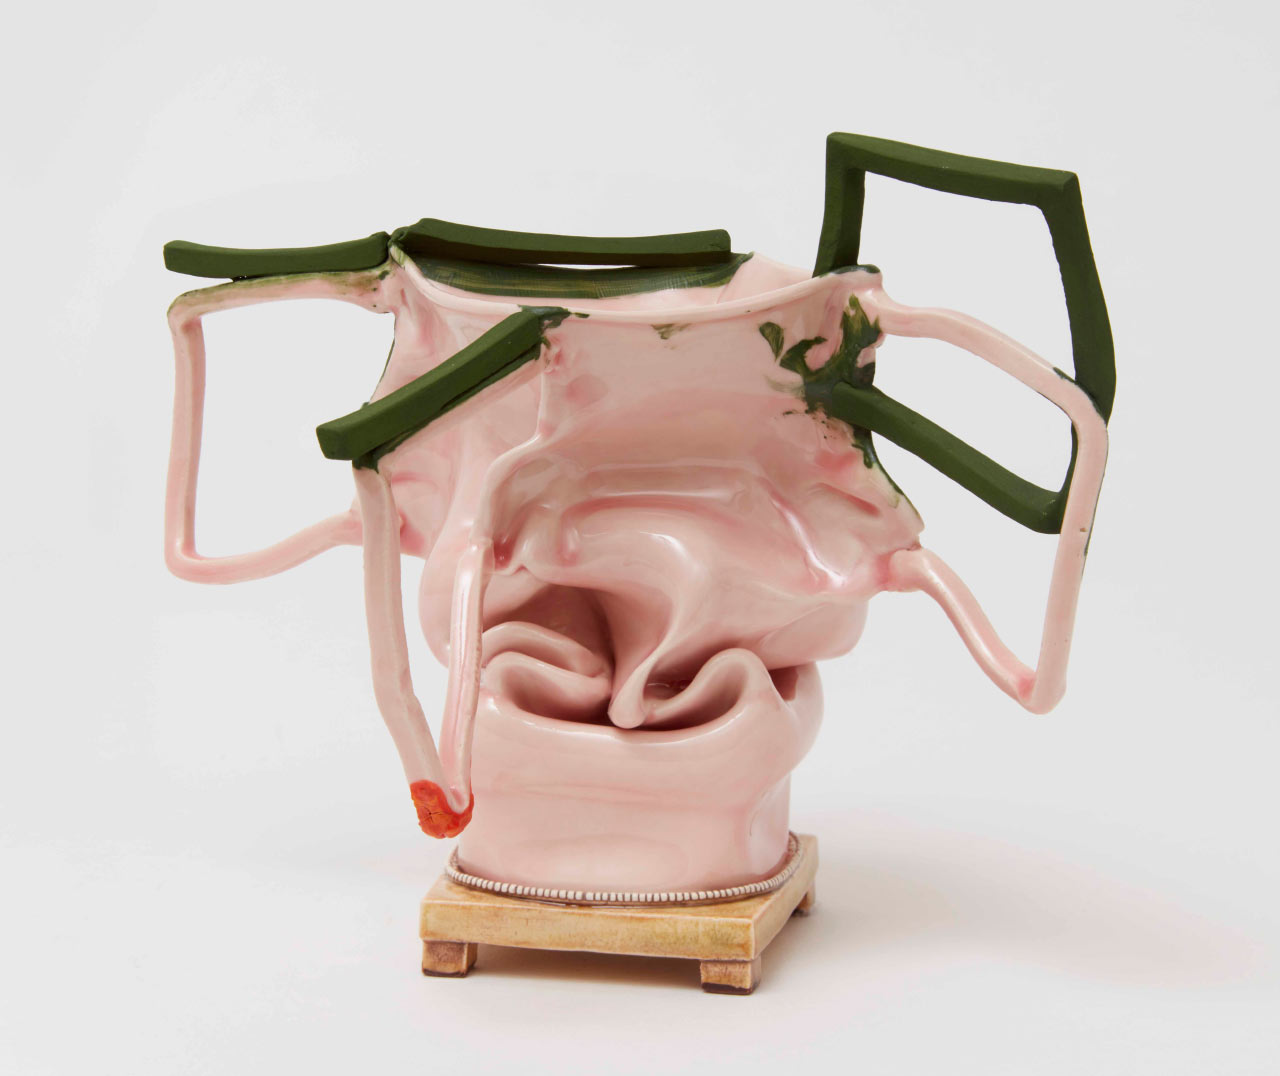 The Ceramic Sculptures of Kathy Butterly